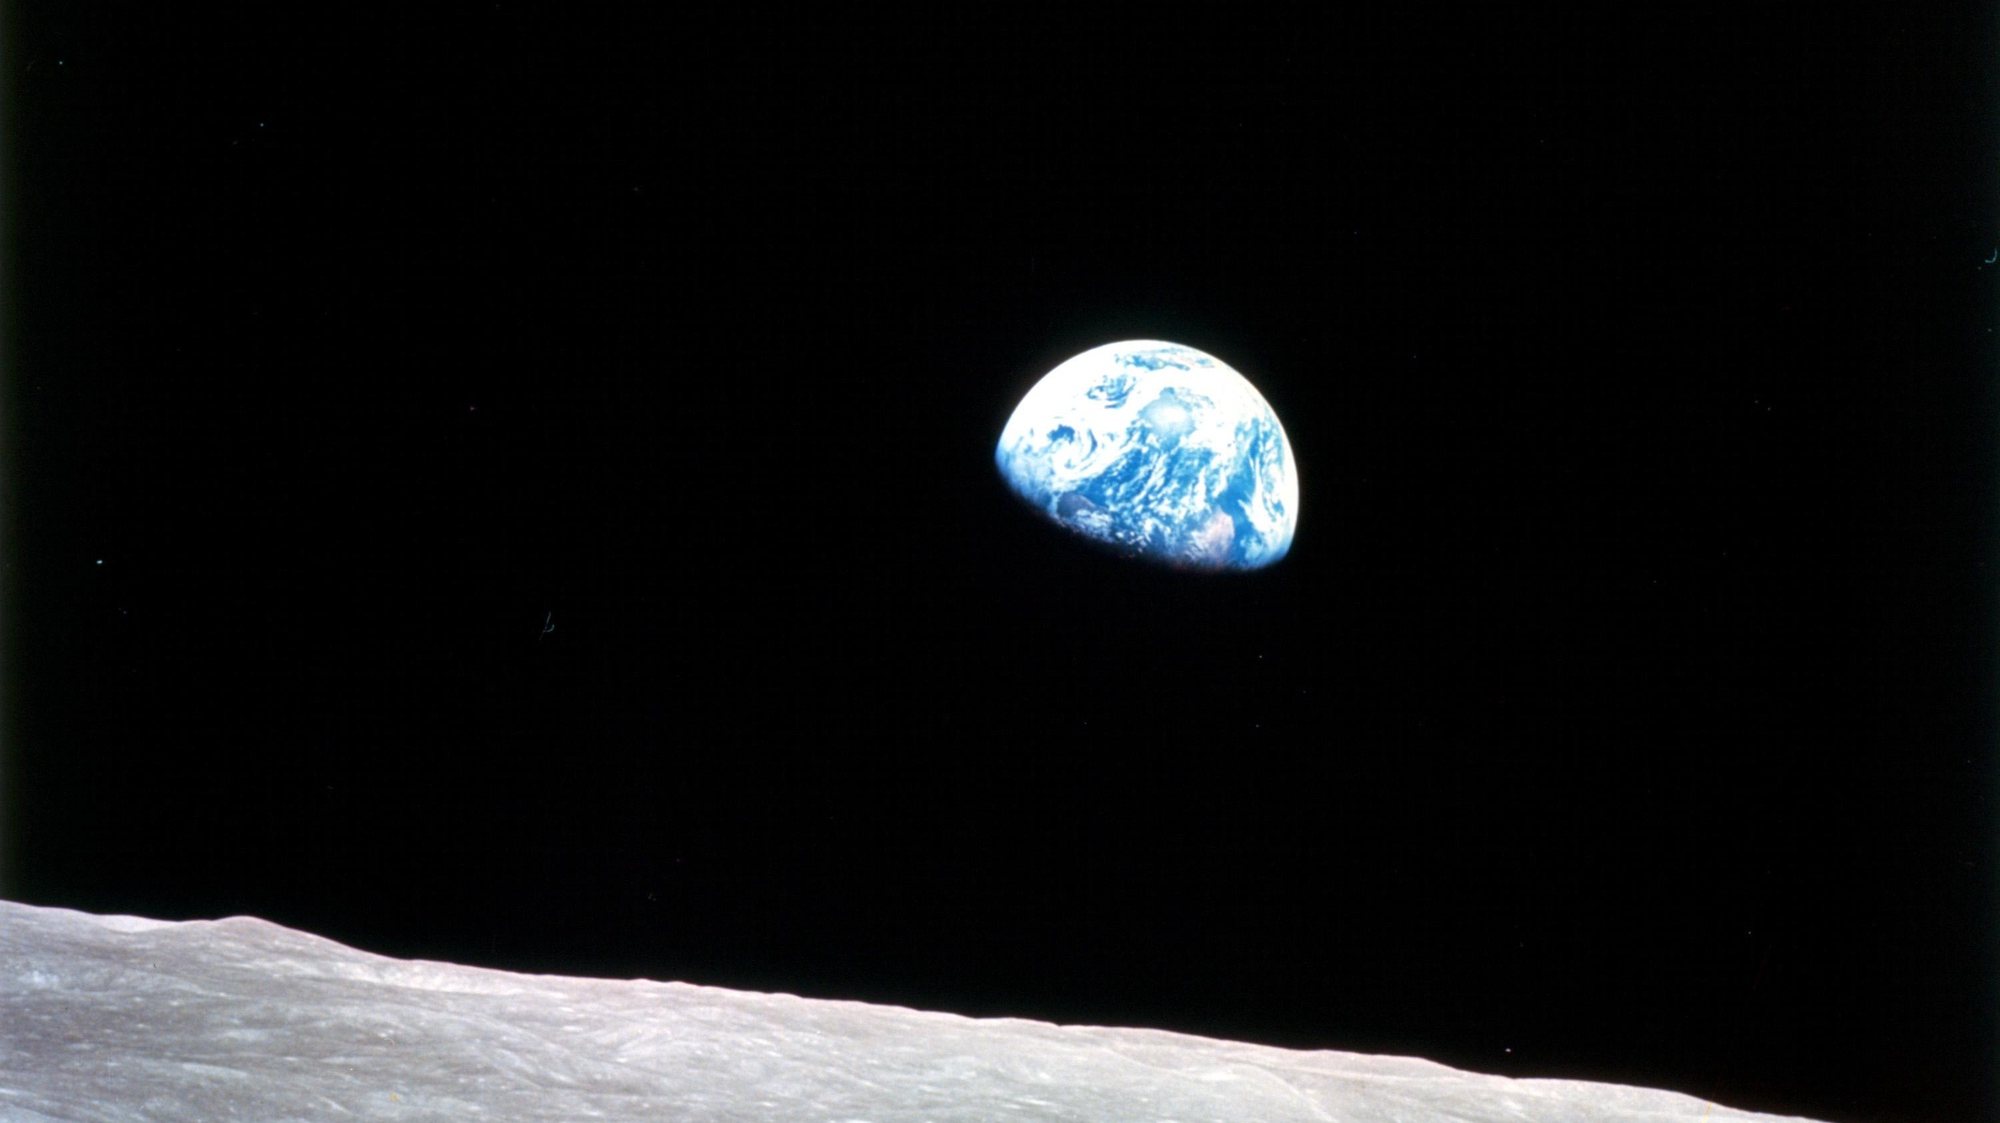 epa07243912 A handout photo made available by the NASA shows the earth as pictured from Apollo 8, the first manned mission to the moon, taken in lunar orbit on 24 December 1968 (issued 21 December 2018). 24 December 2018 marks 50 years since the iconic Earthrise photograph was taken.  EPA/Bill Anders/NASA / HANDOUT  HANDOUT EDITORIAL USE ONLY/NO SALES